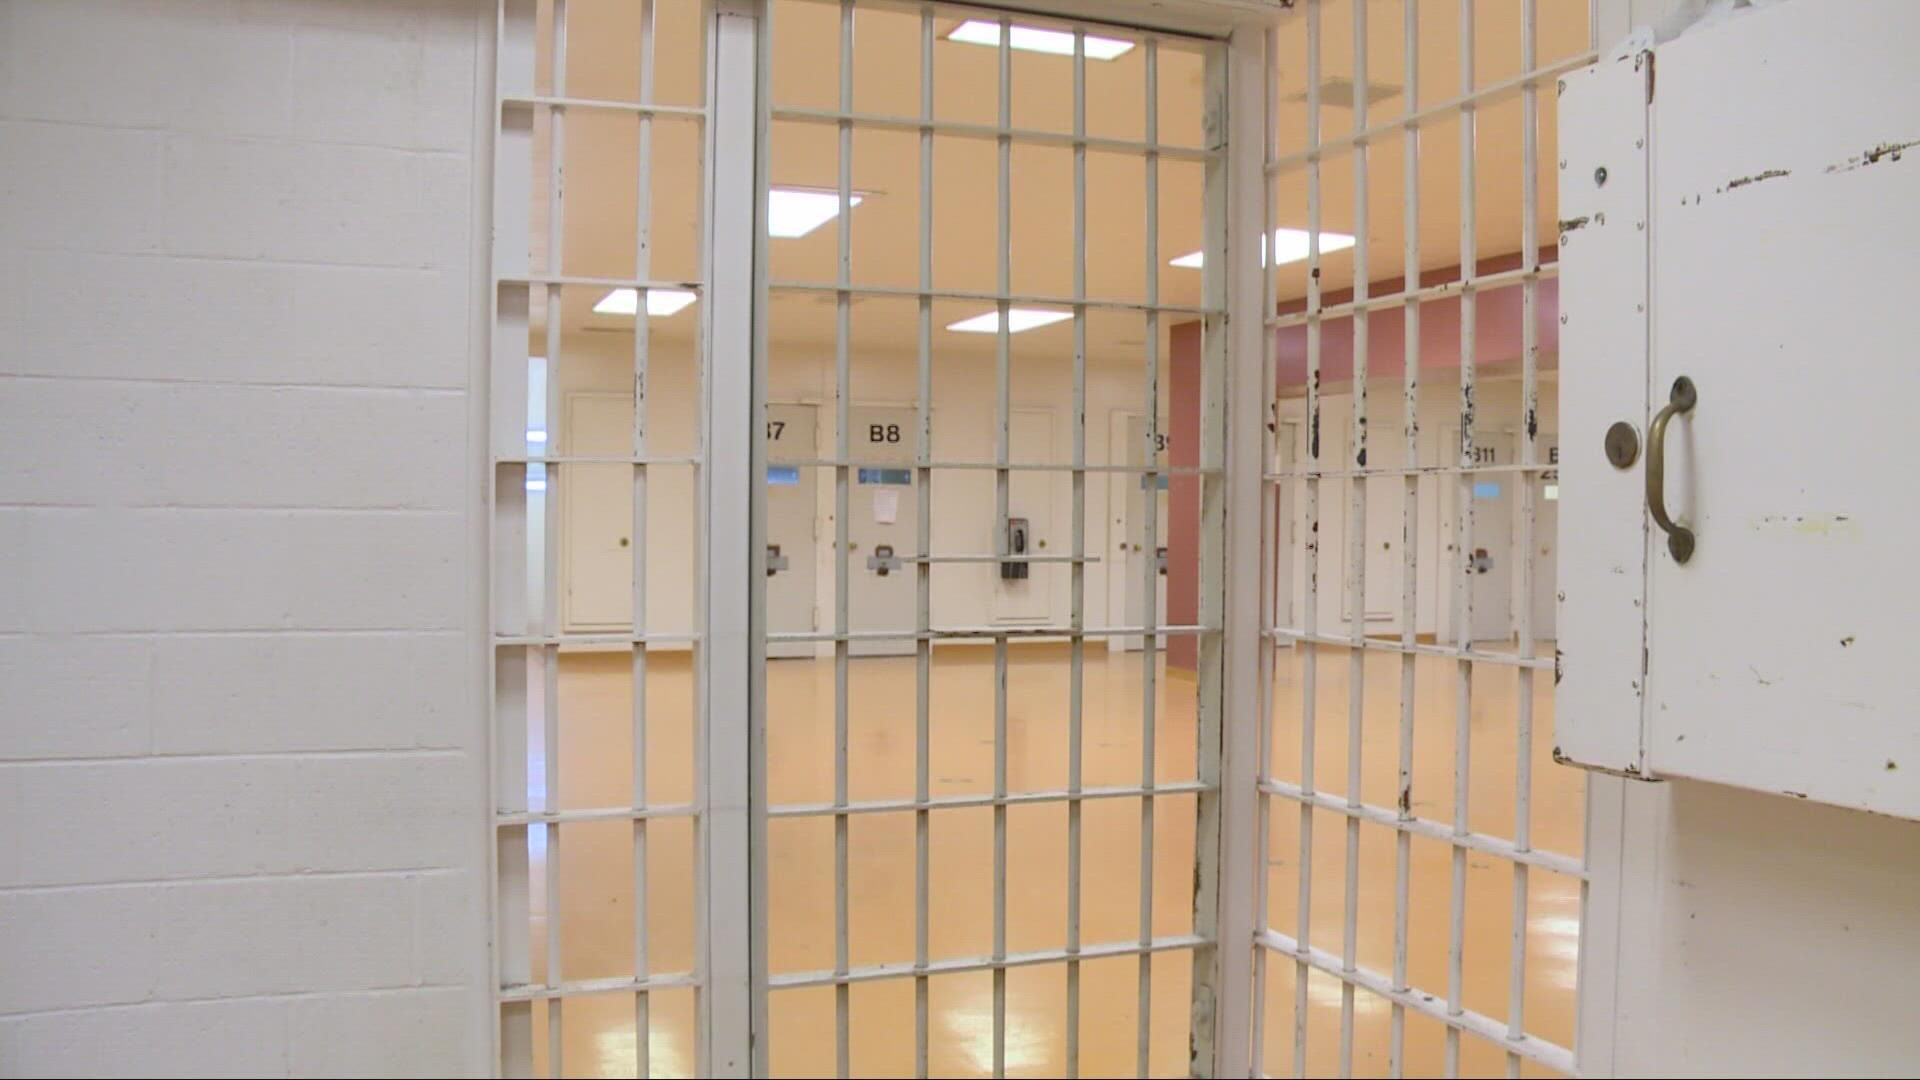 The move comes after the 12-member Justice Center Executive Steering Committee voted down a proposal for a new jail to be built on Transport Road in Cleveland.